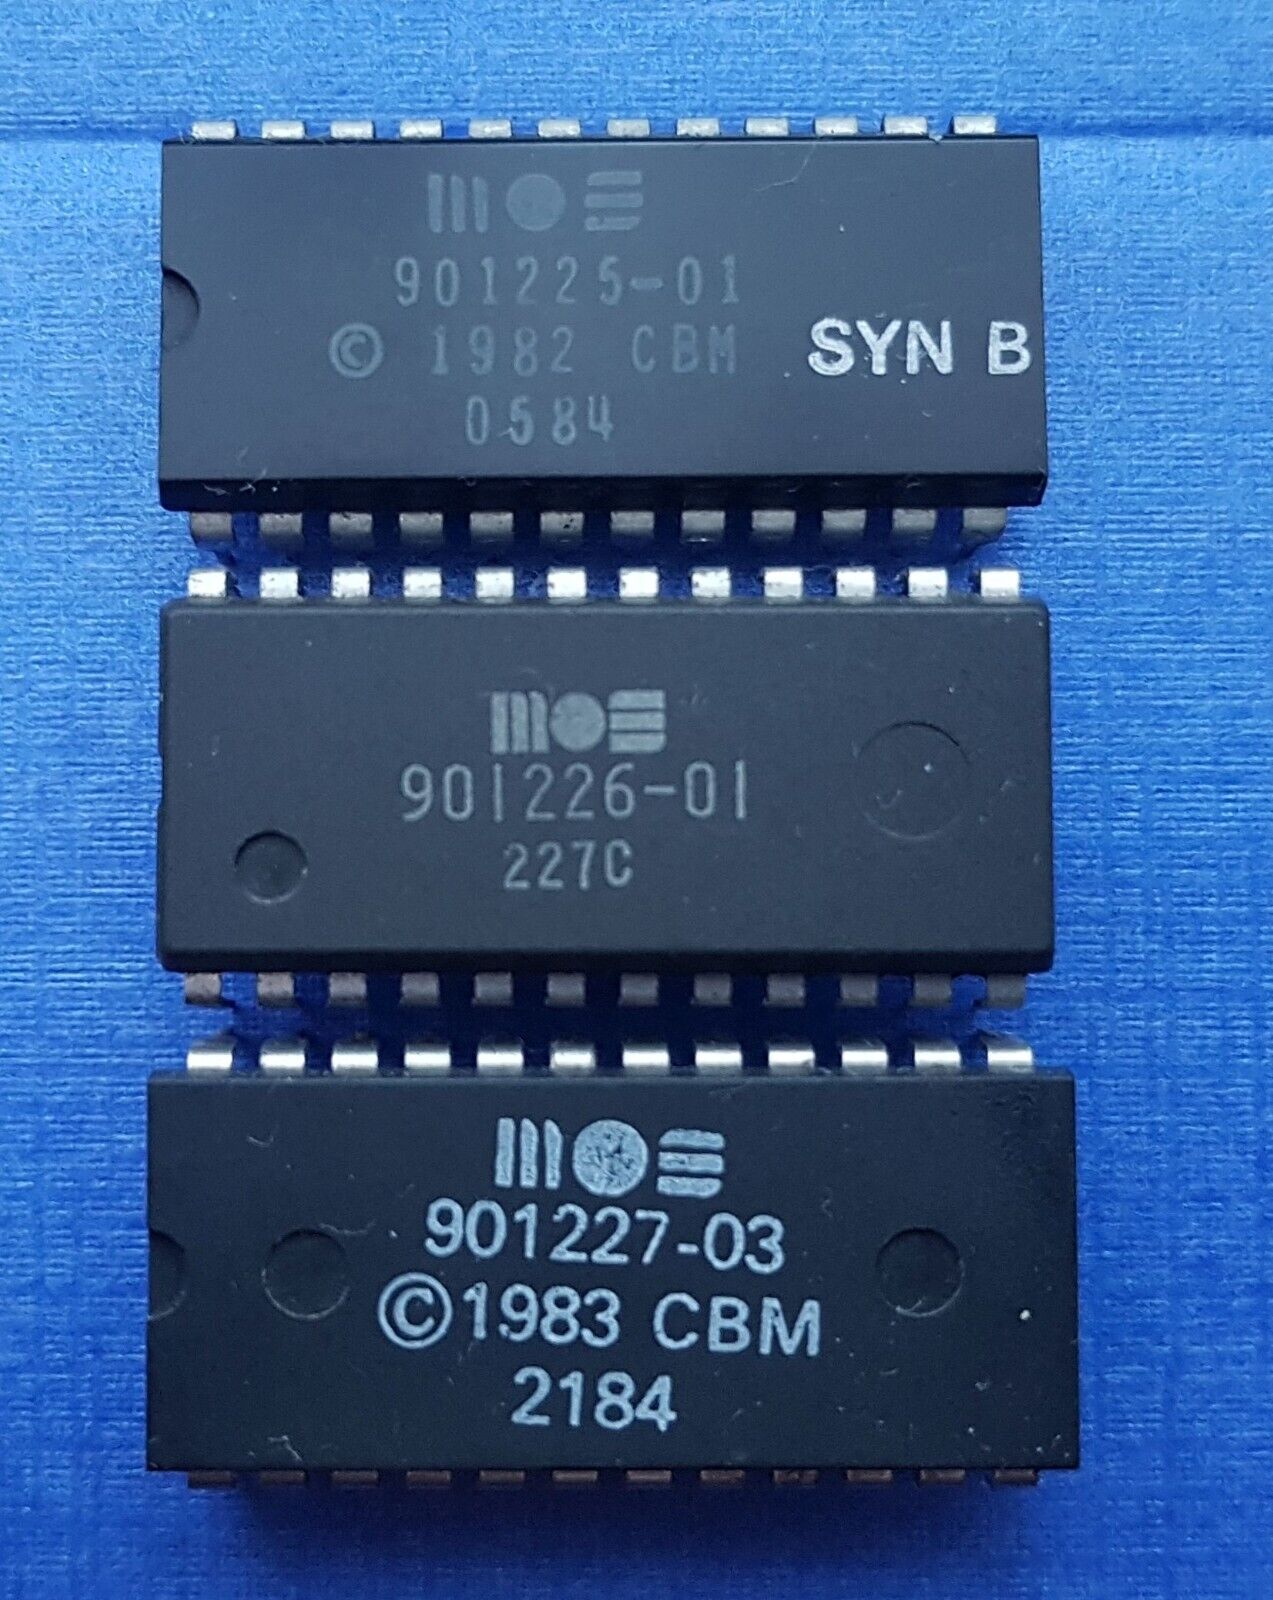 MOS 901225-01/901226-01/901227-03 ROM set Chips for COMMODORE 64 in ESD box.